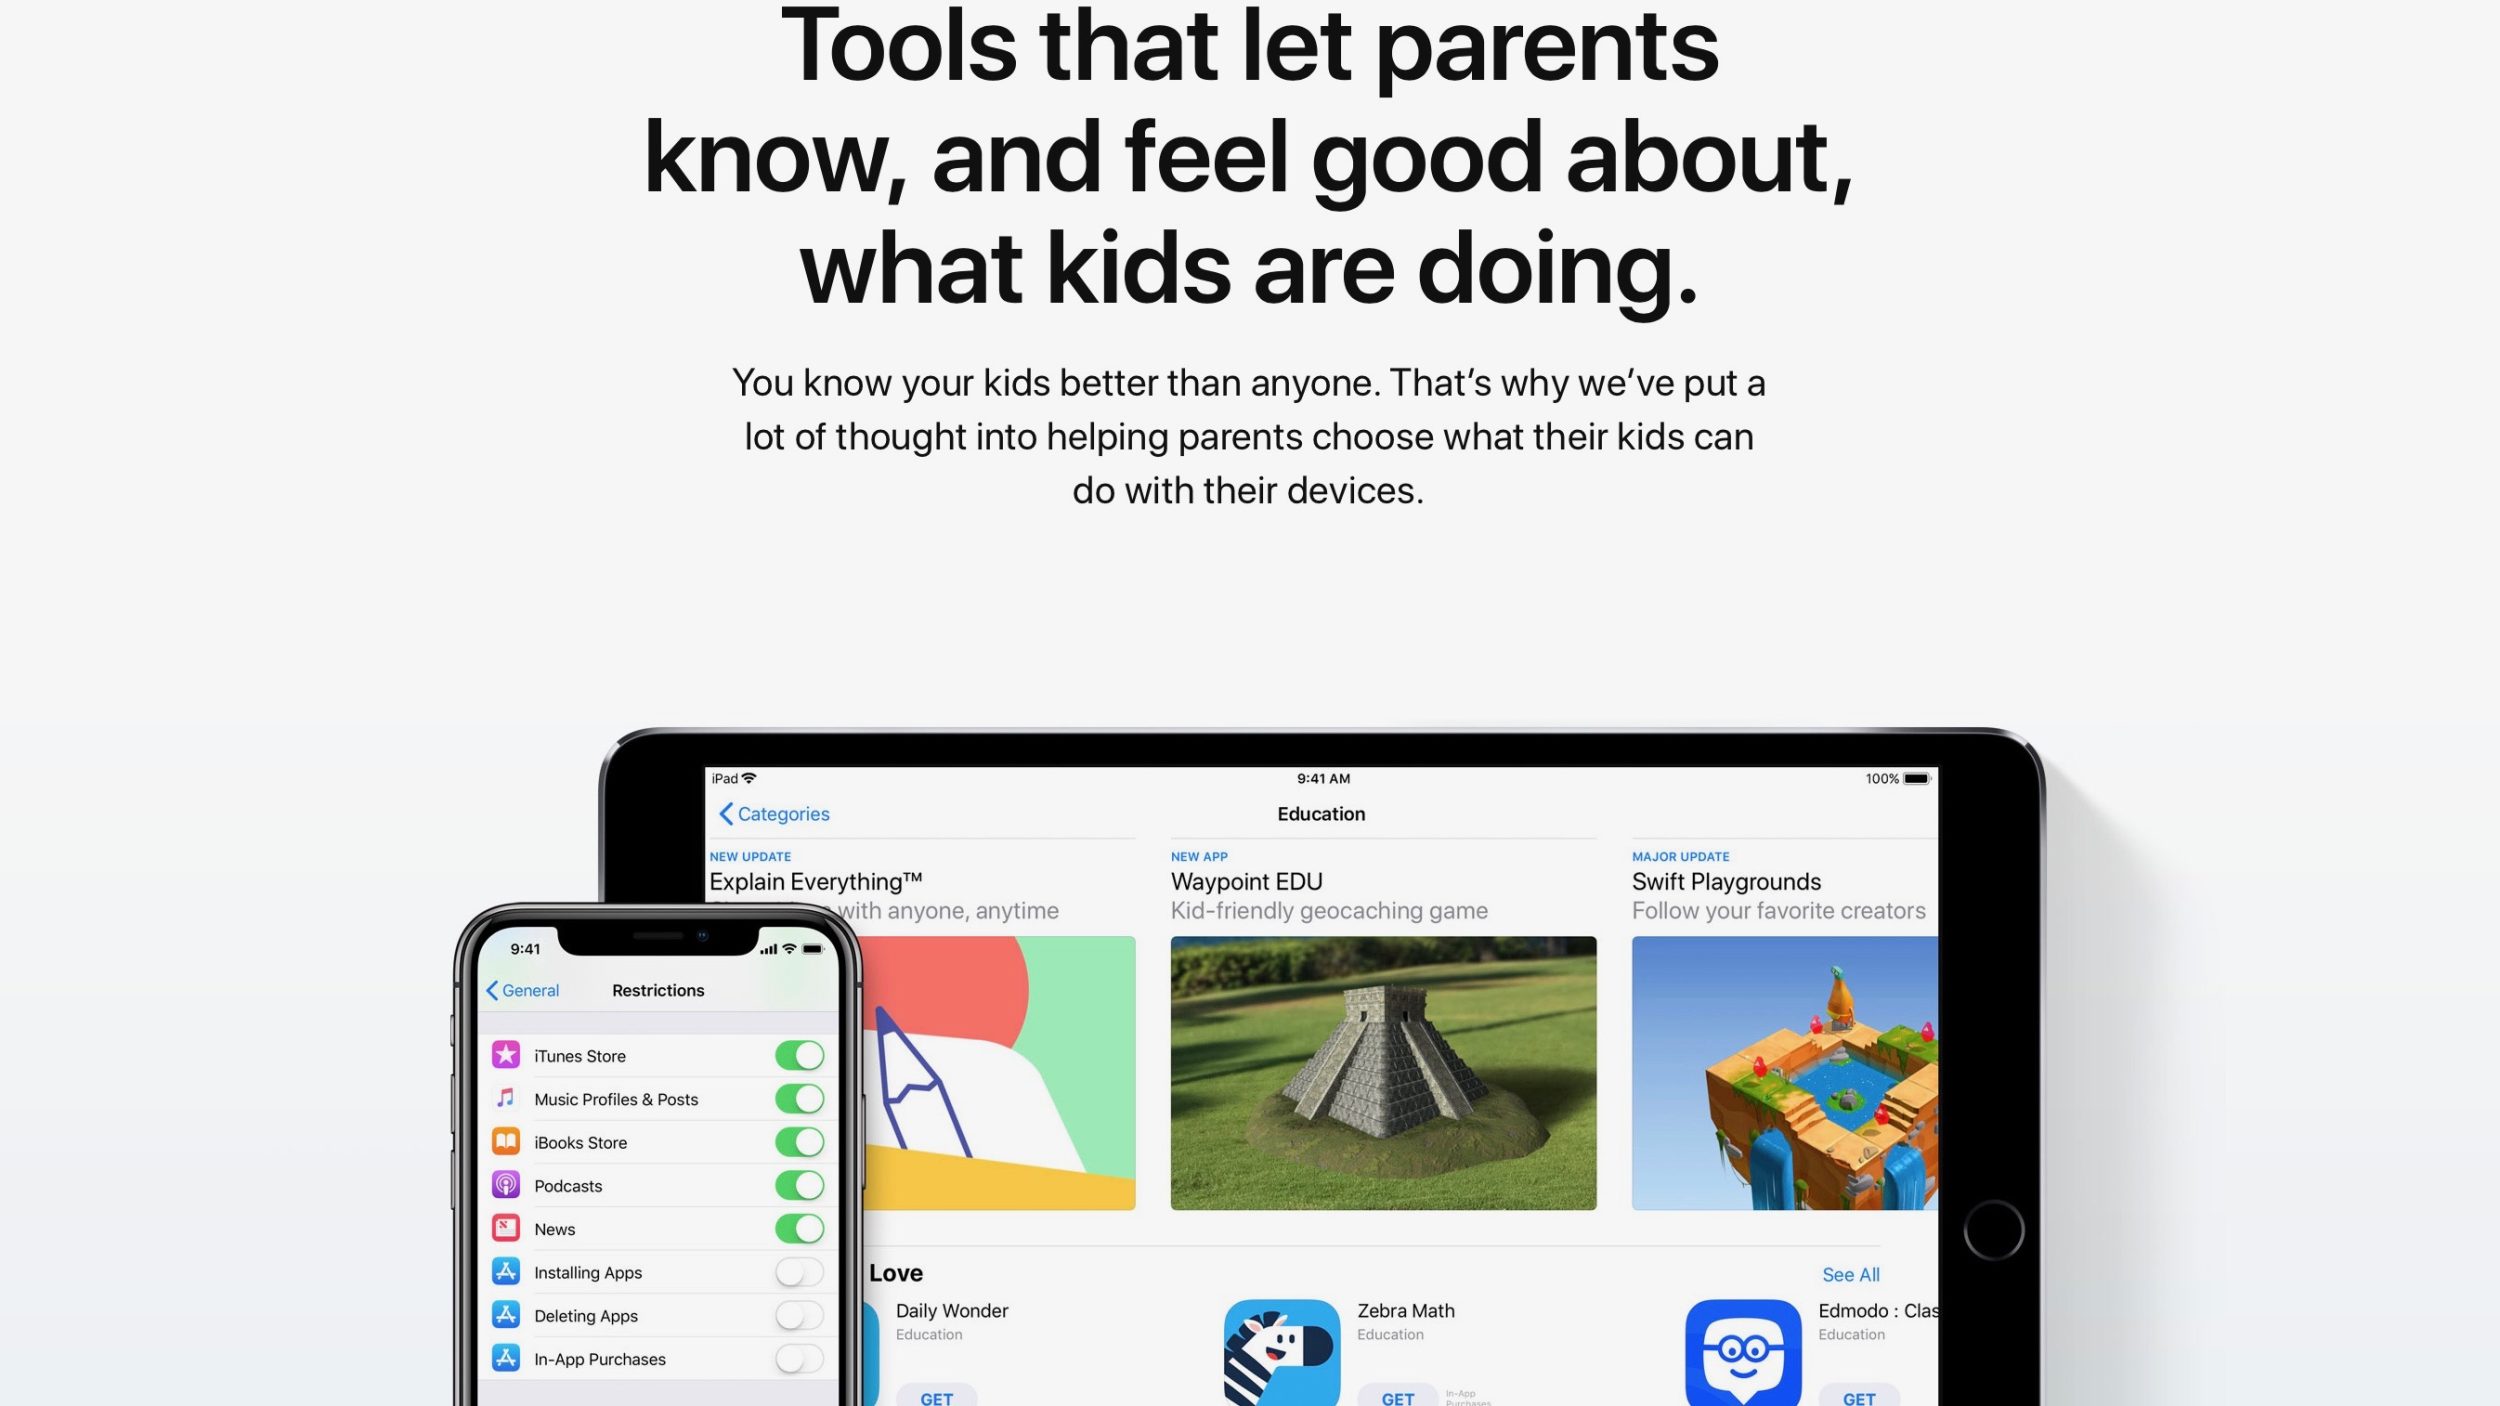 Apple Publishes New 'Families’ webpage with Parental Control Tips